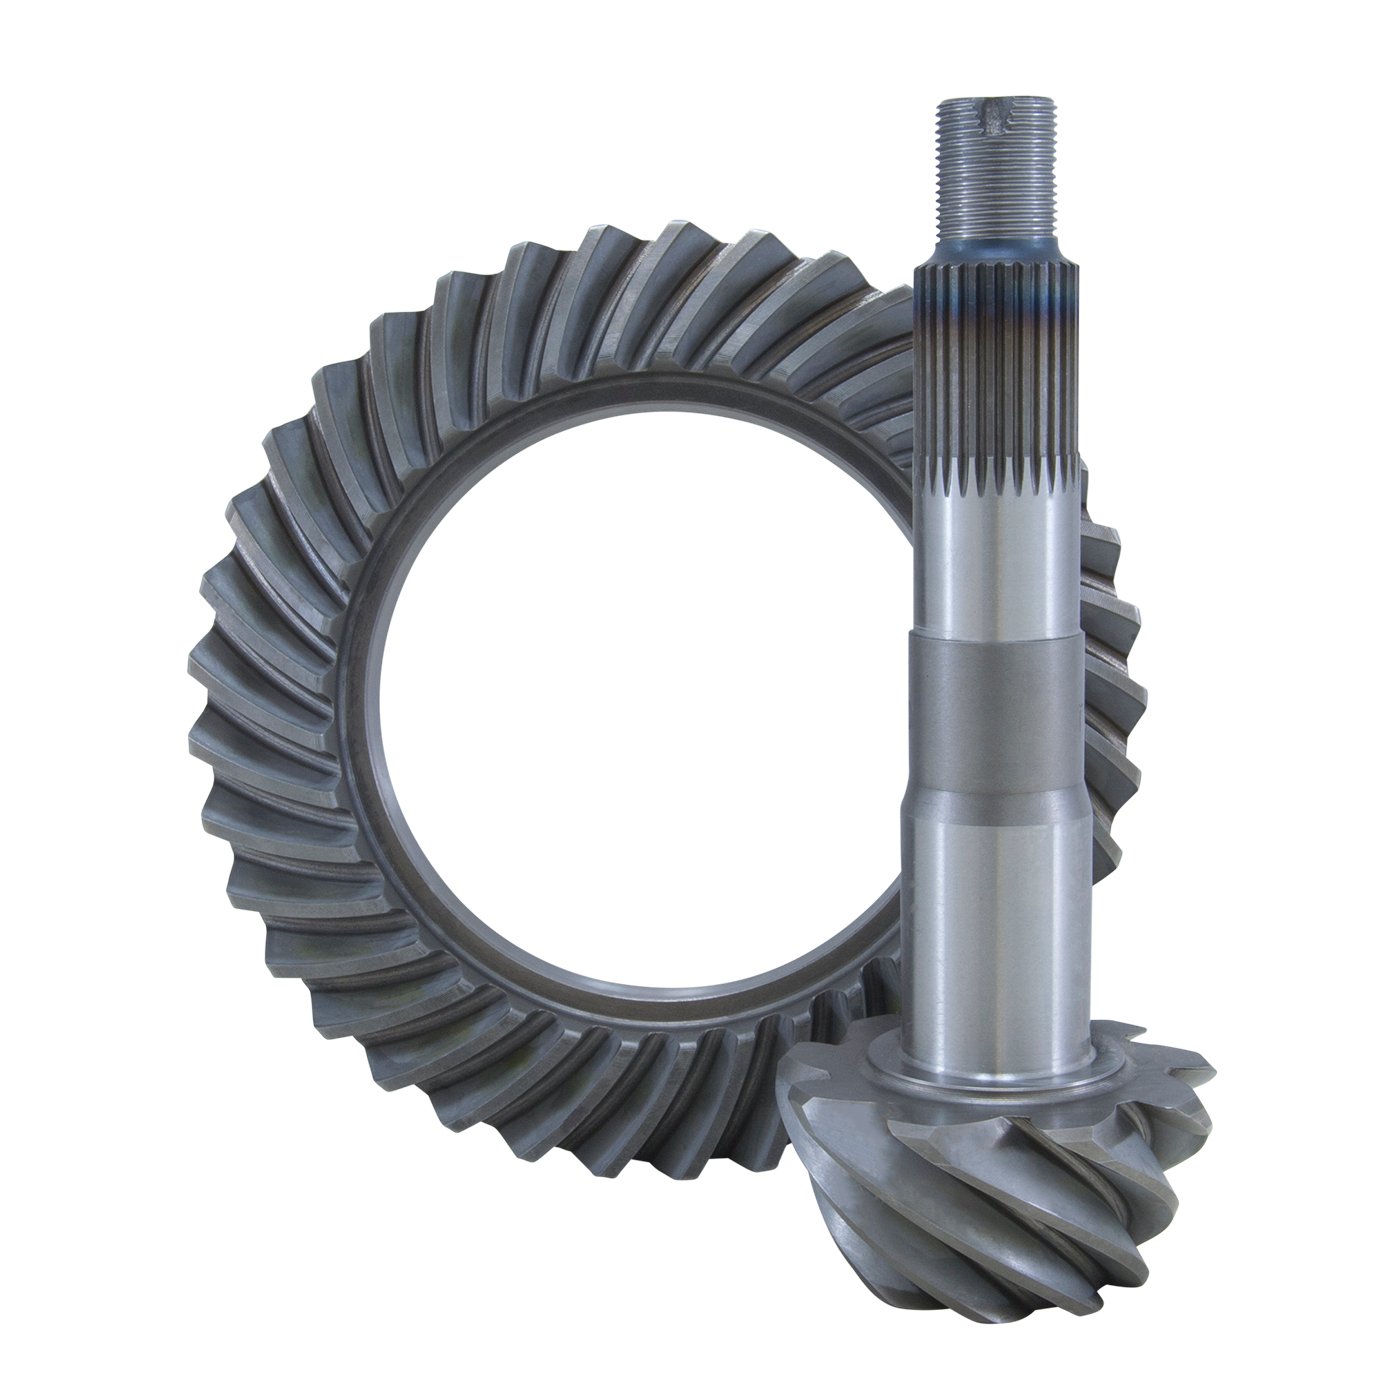 High Performance Ring & Pinion Gear Set For Toyota V6 In A 5.29 Ratio